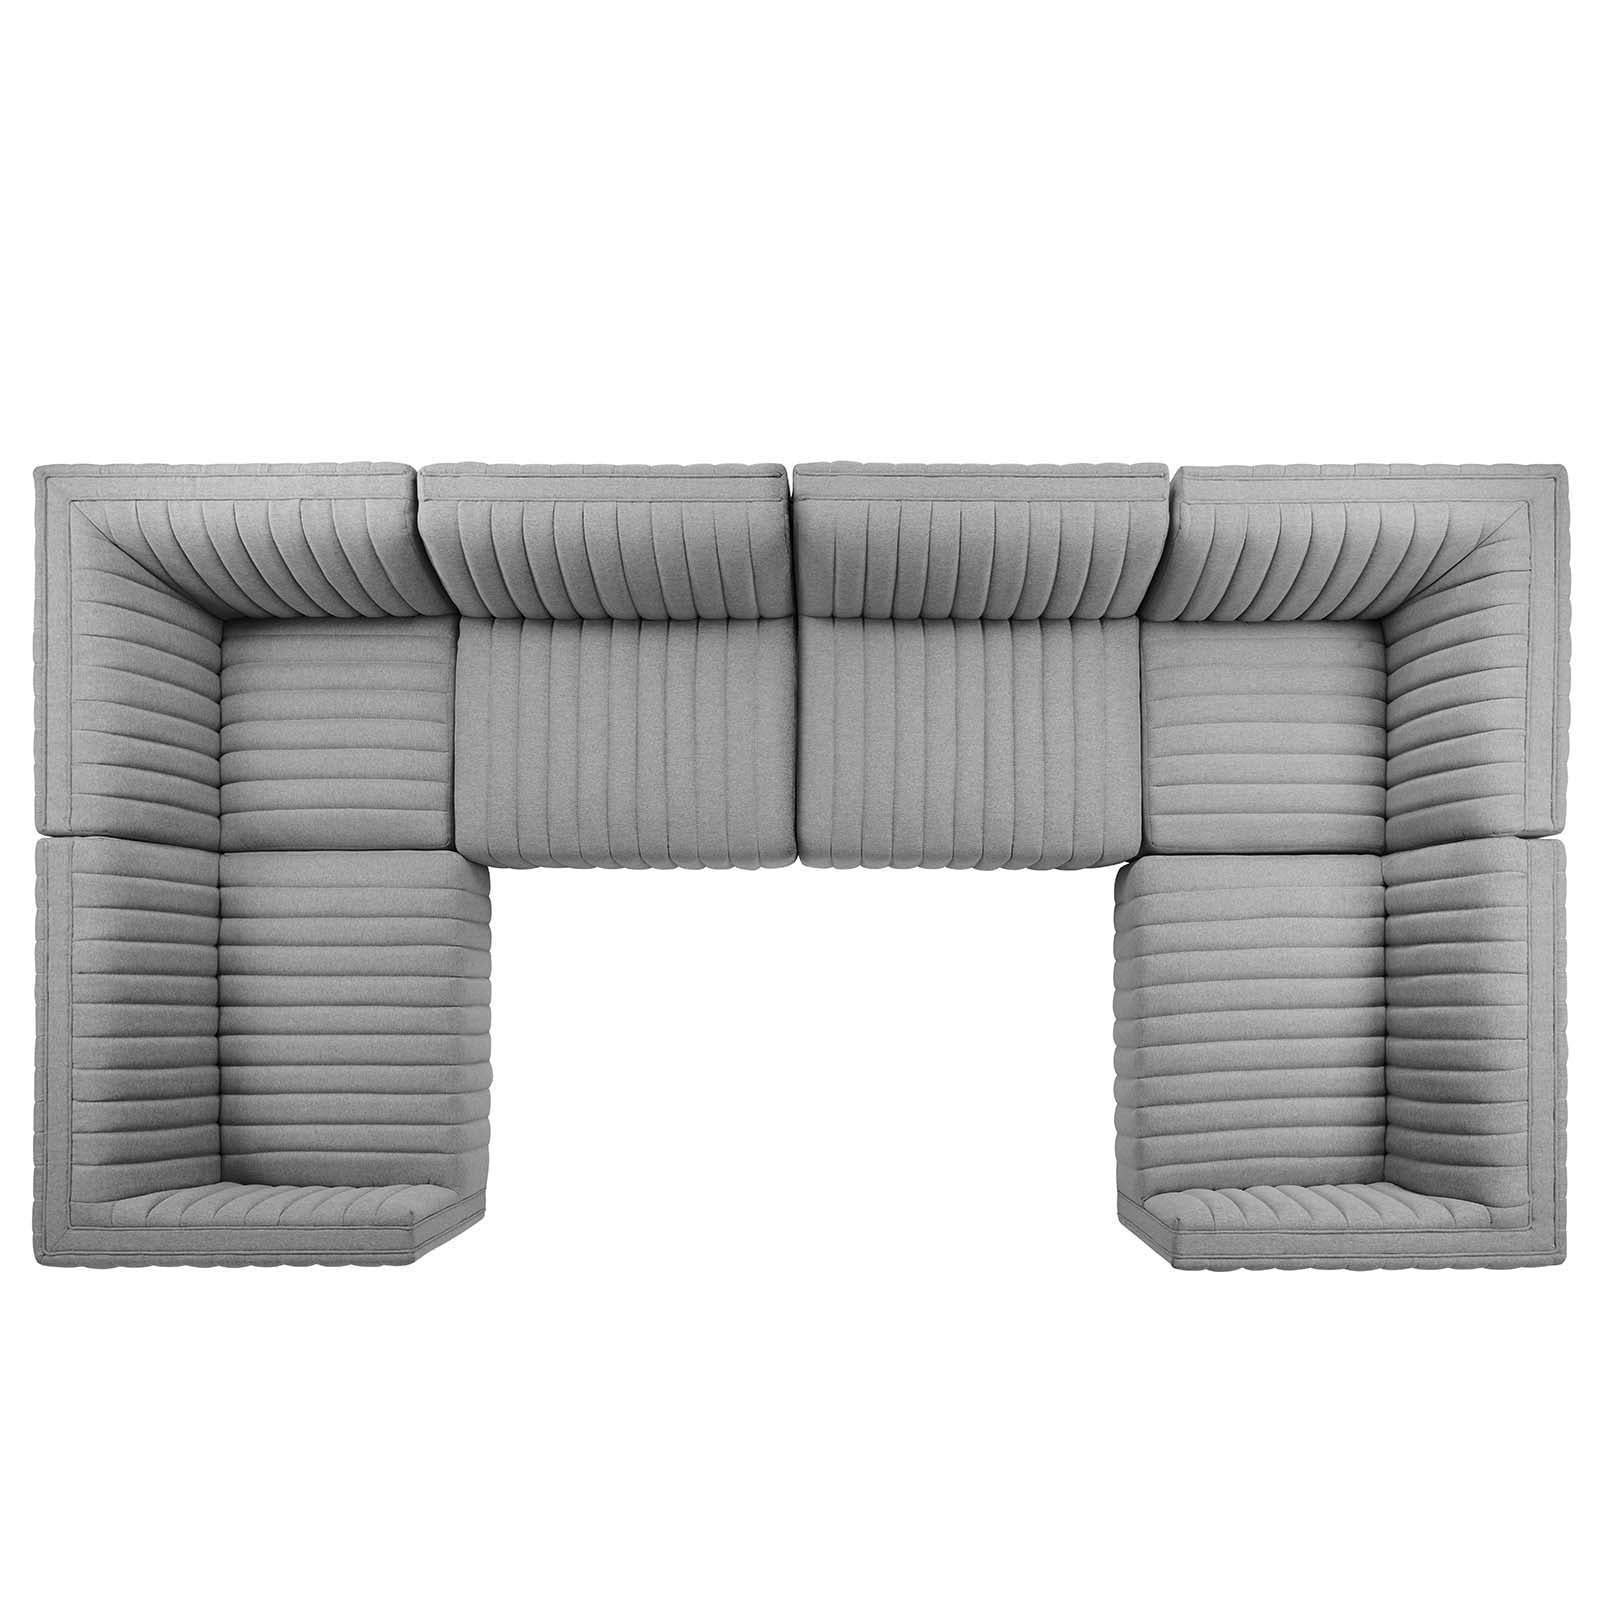 Conjure Channel Tufted Upholstered Fabric 6-Piece U-Shaped Sectional - East Shore Modern Home Furnishings